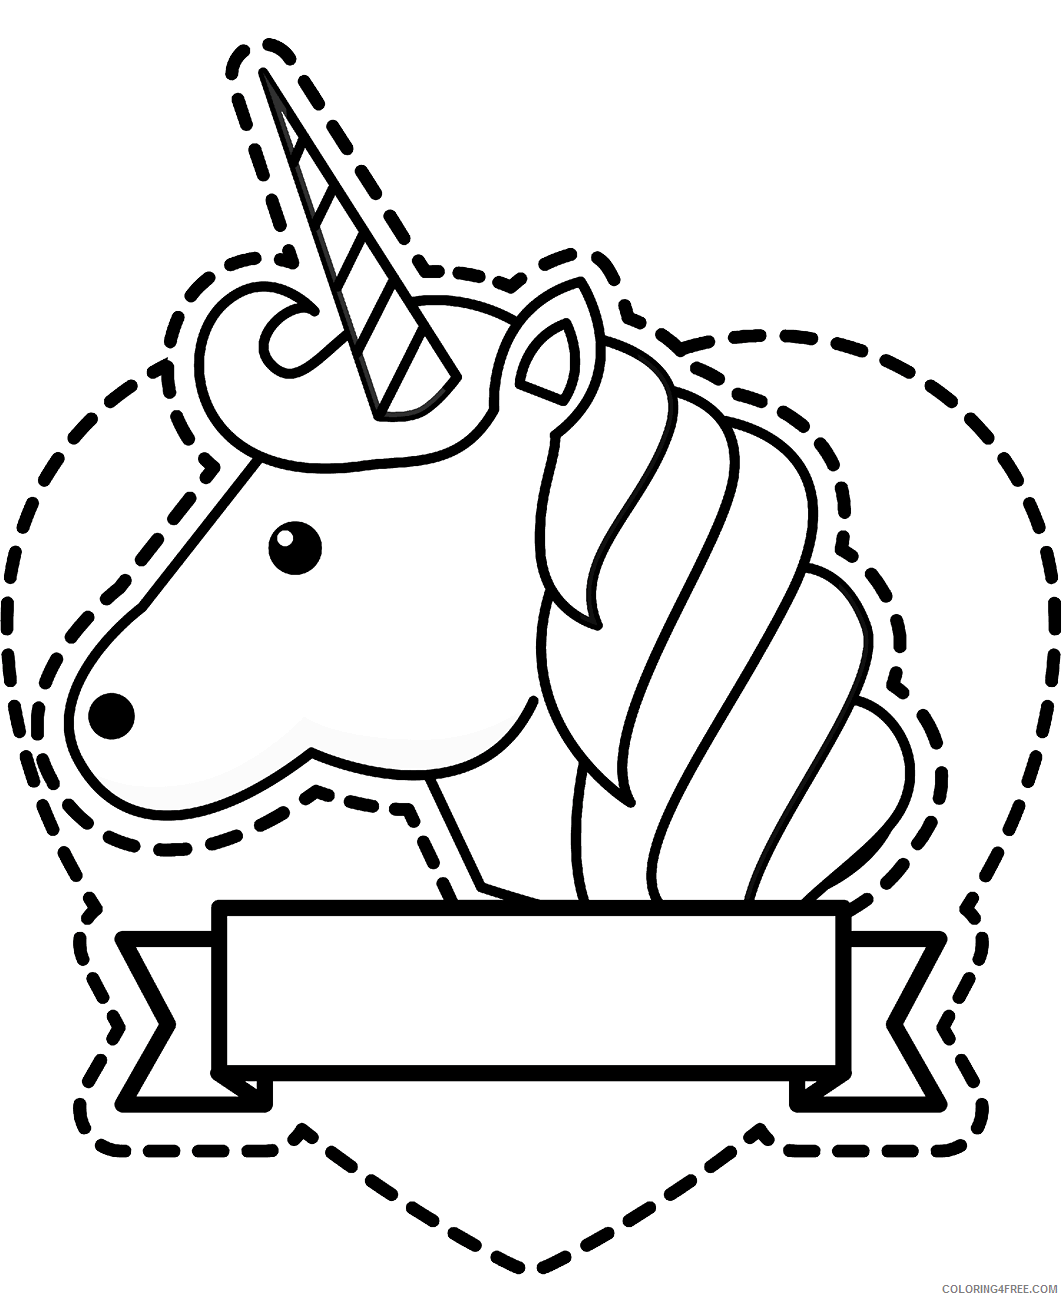 Unicorn Coloring Pages sticker_unicorn Printable 2021 6047 Coloring4free